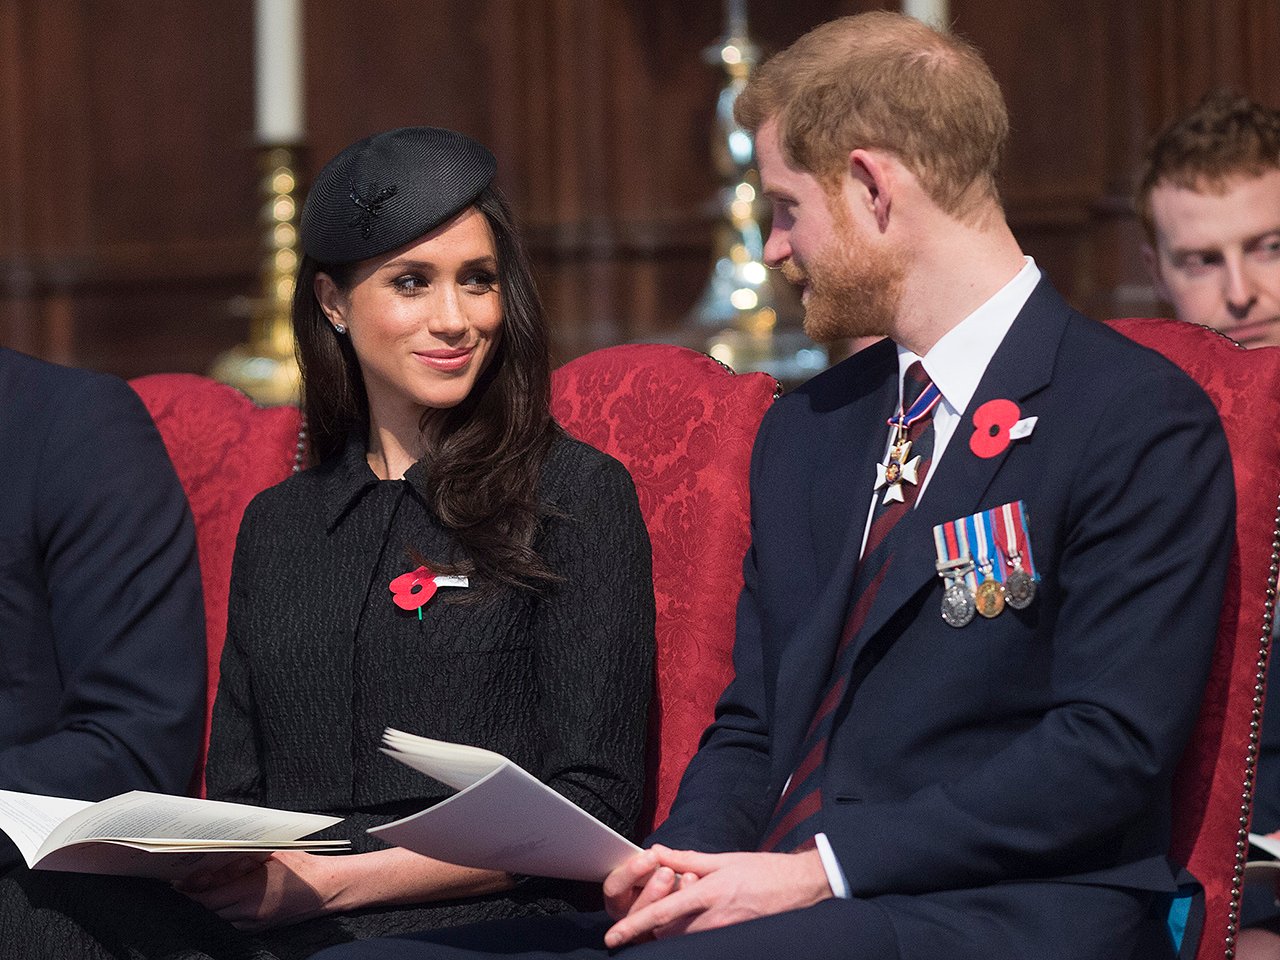 Image for the royal wedding official tv